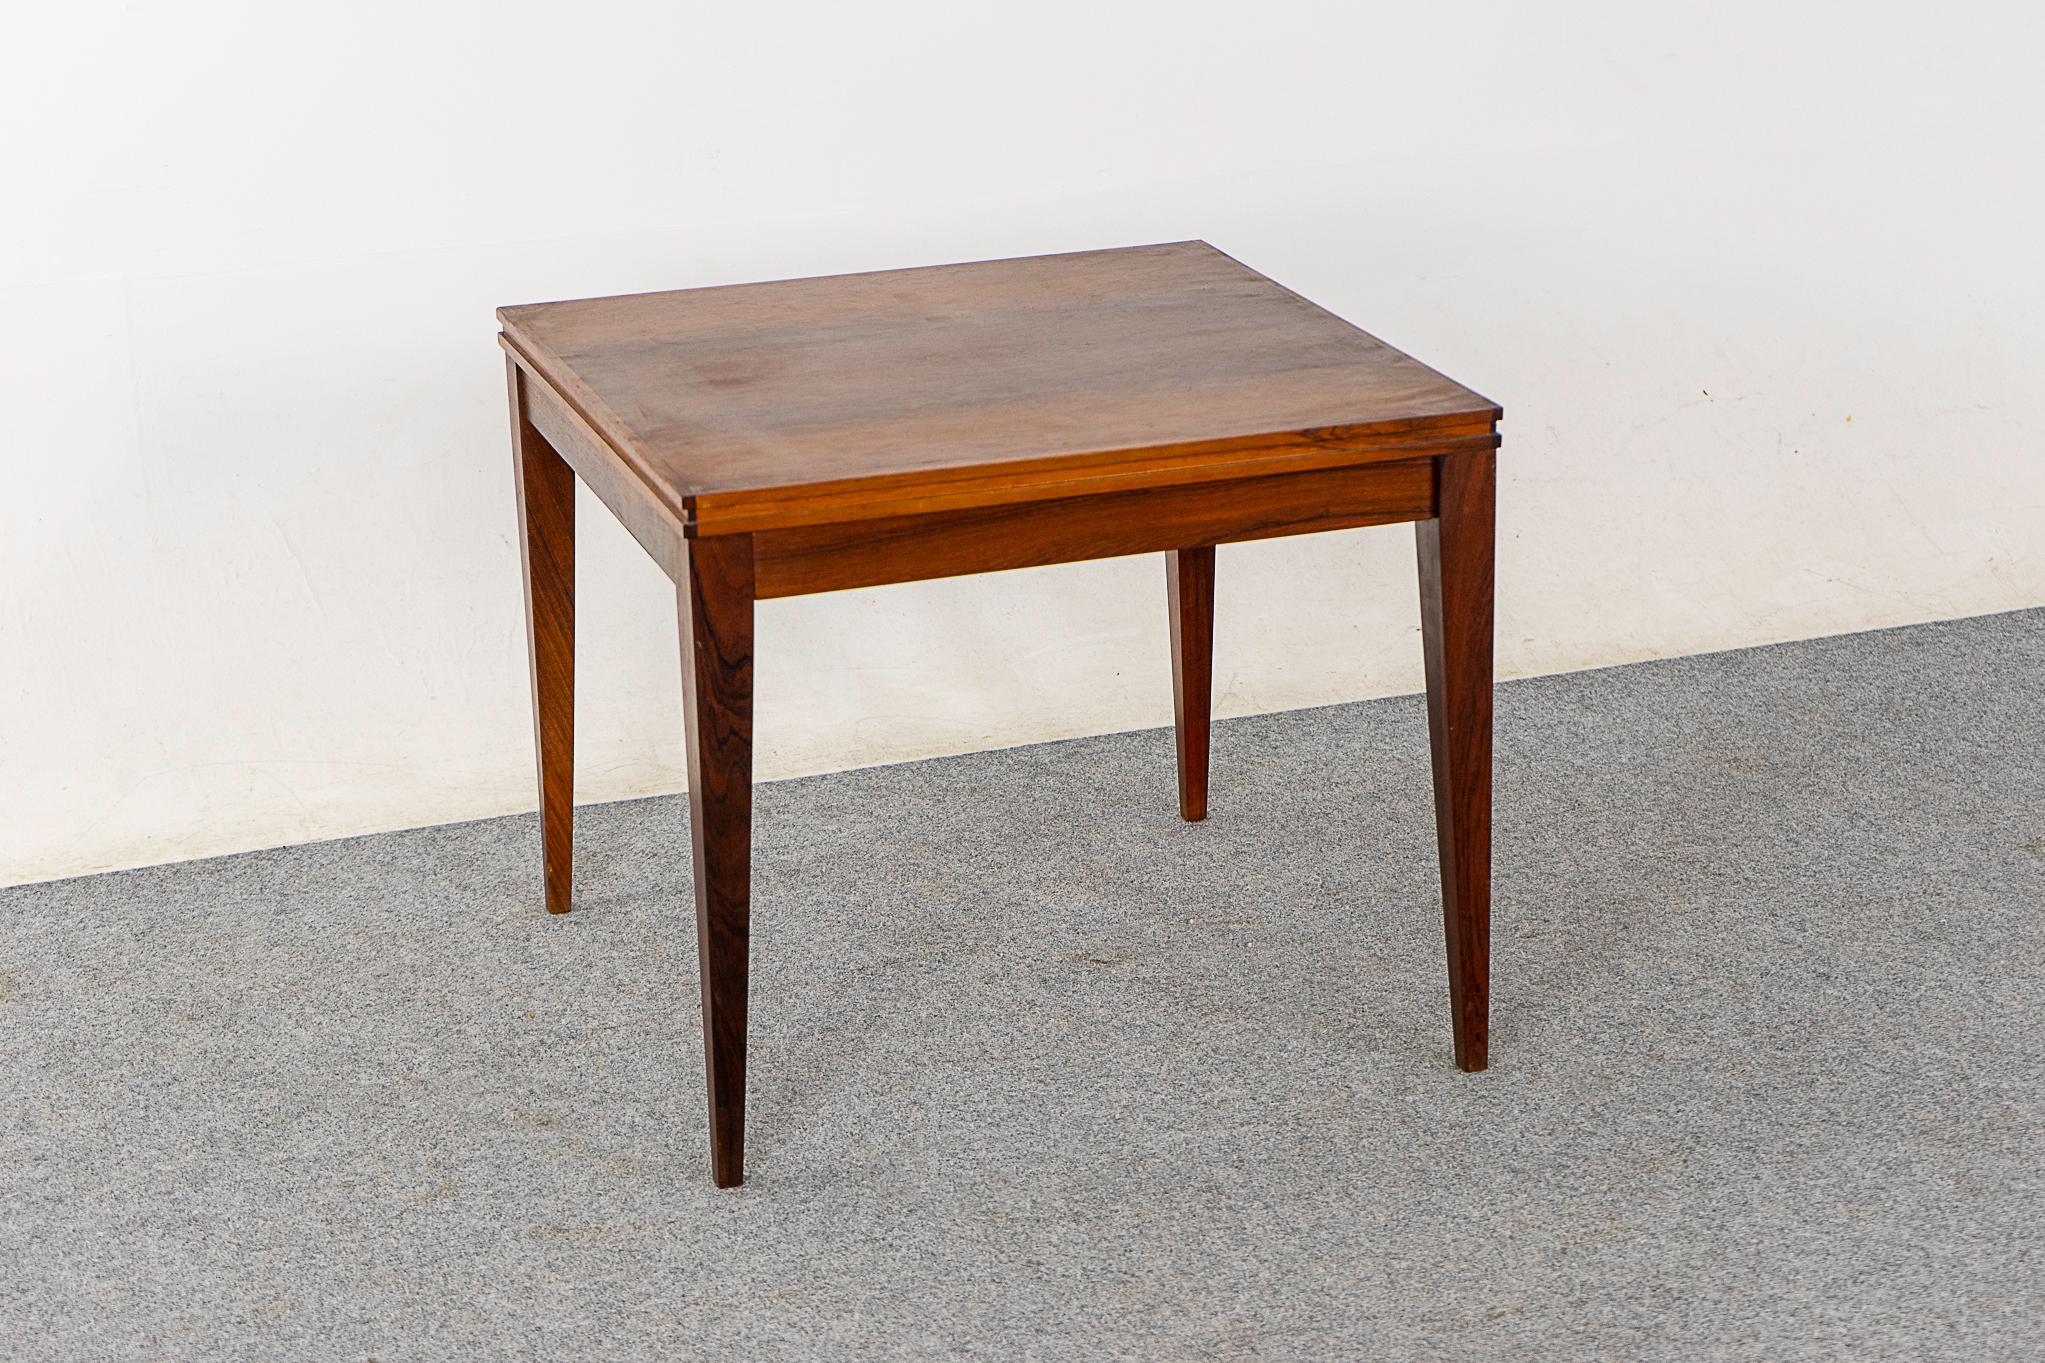 Rosewood mid-century side table, circa 1960's. Compact, highly functional table with slender tapering legs. Pairs perfectly with large sofas!

Please inquire for international and remote shipping rates.